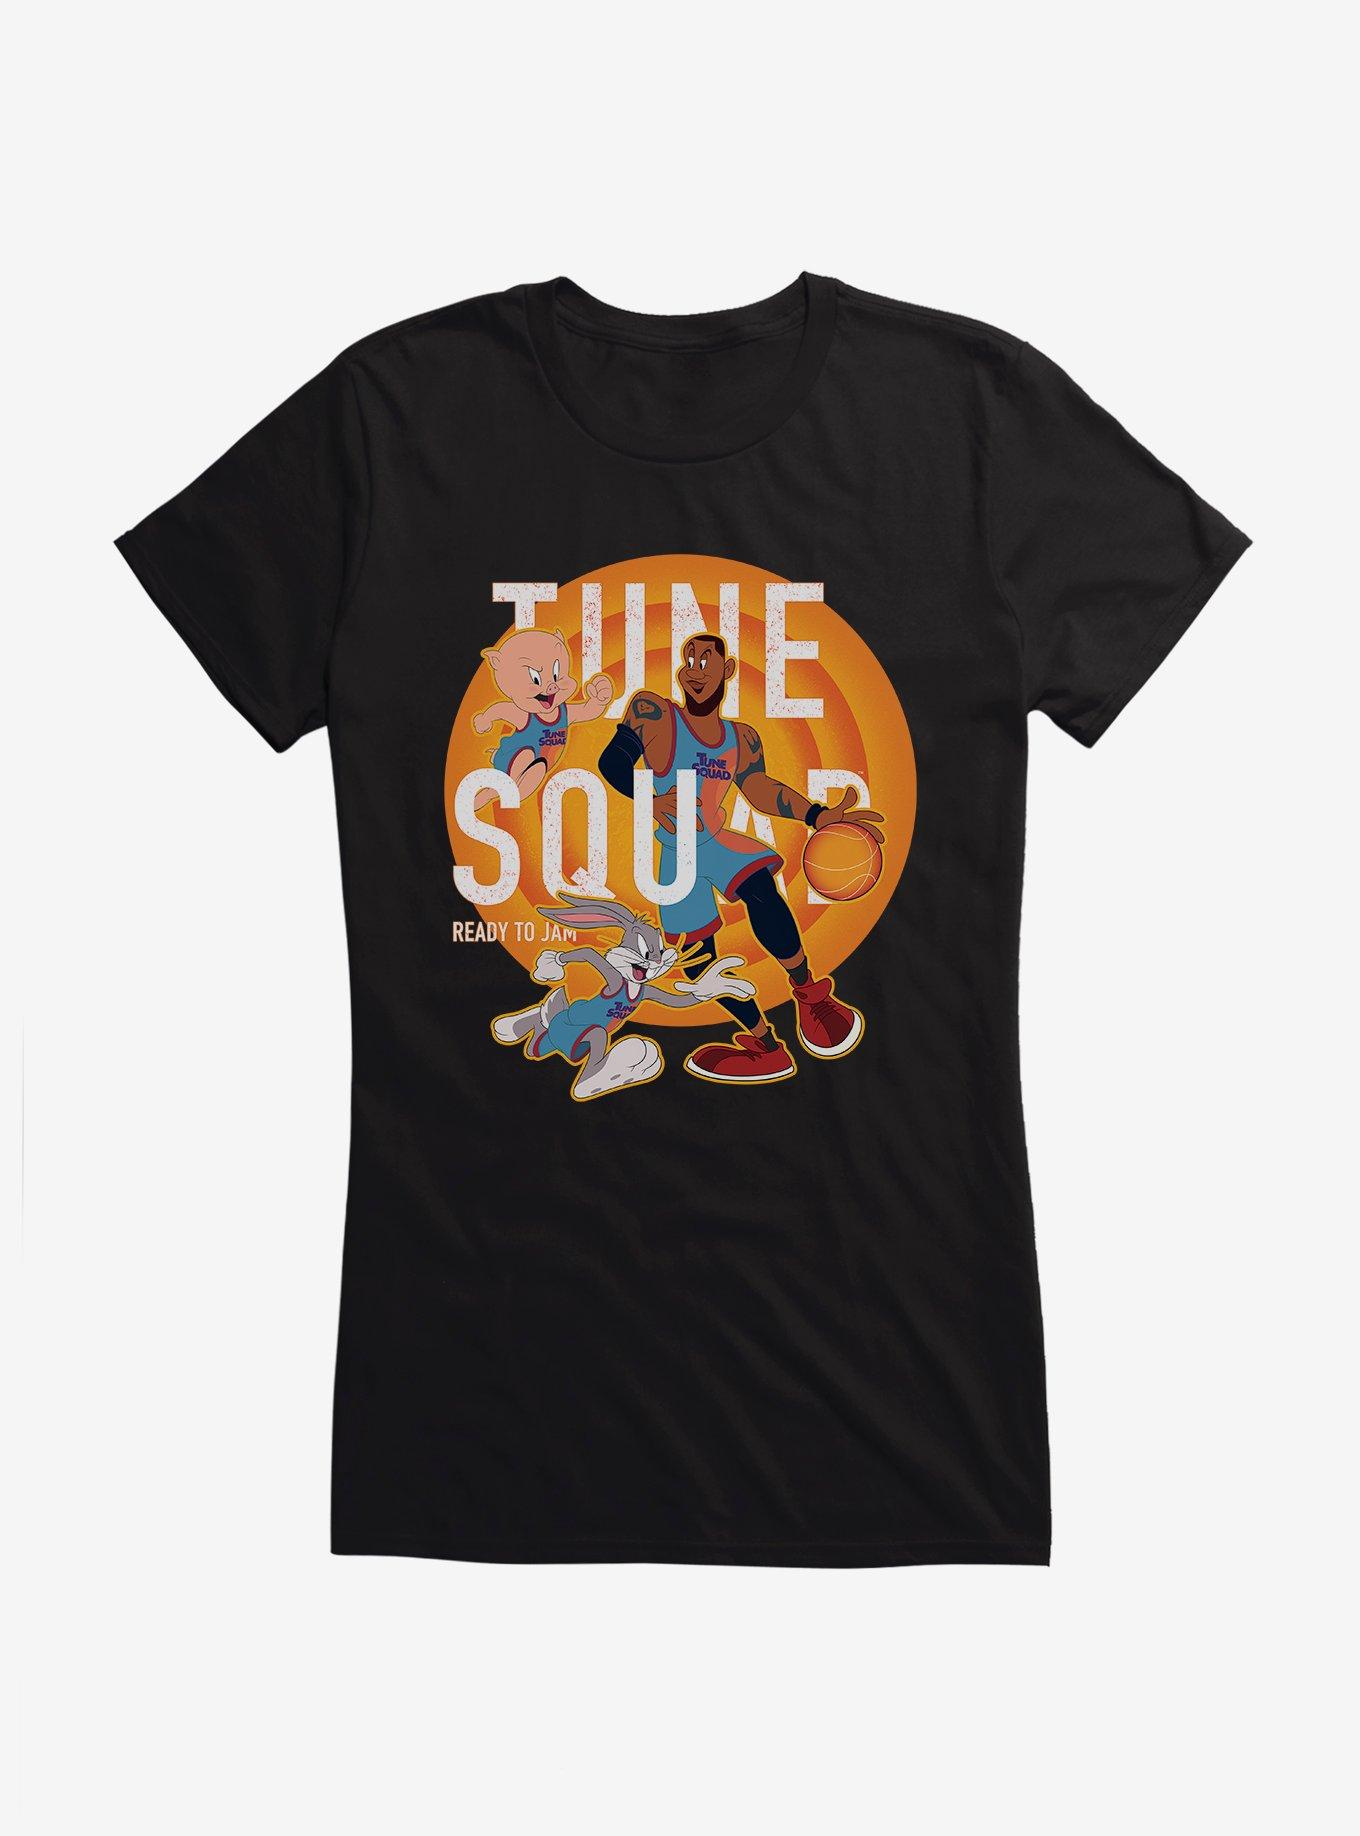 Space Jam: A New Legacy LeBron, Bugs Bunny And Porky Pig Tune Squad Girls T-Shirt, BLACK, hi-res